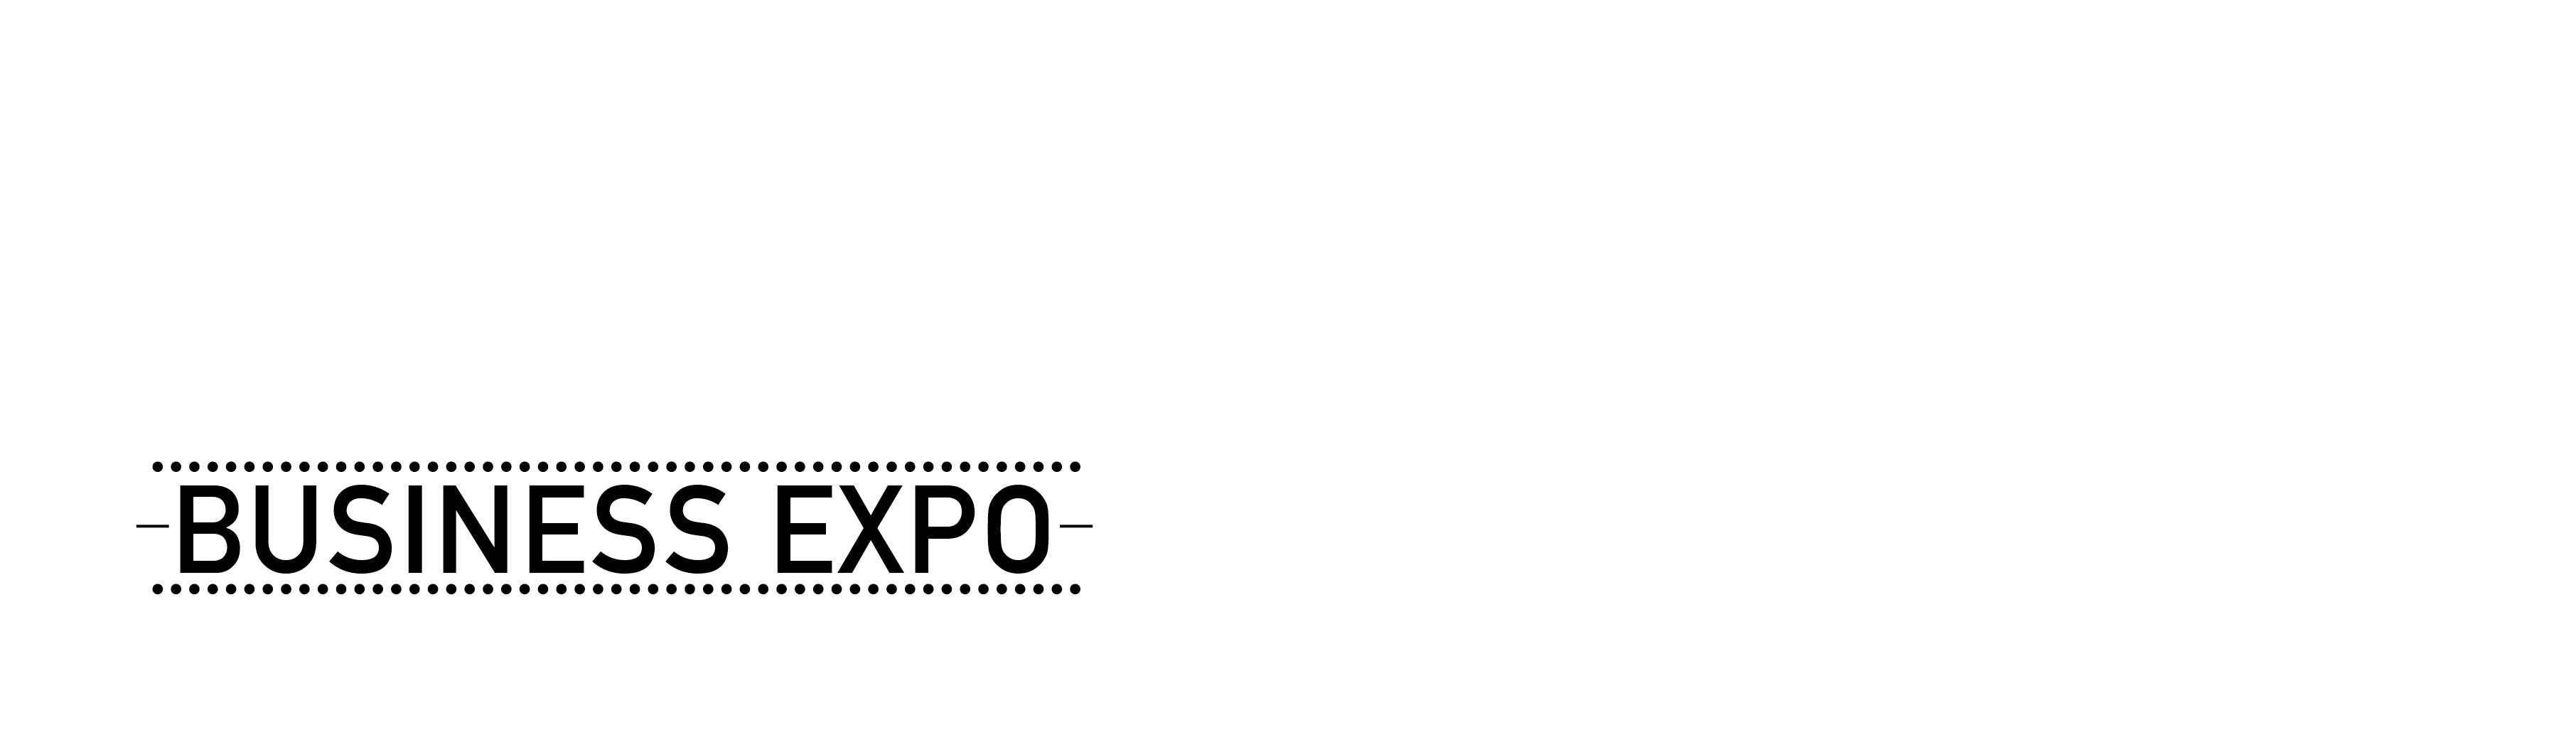 The Street Food Business Expo logo